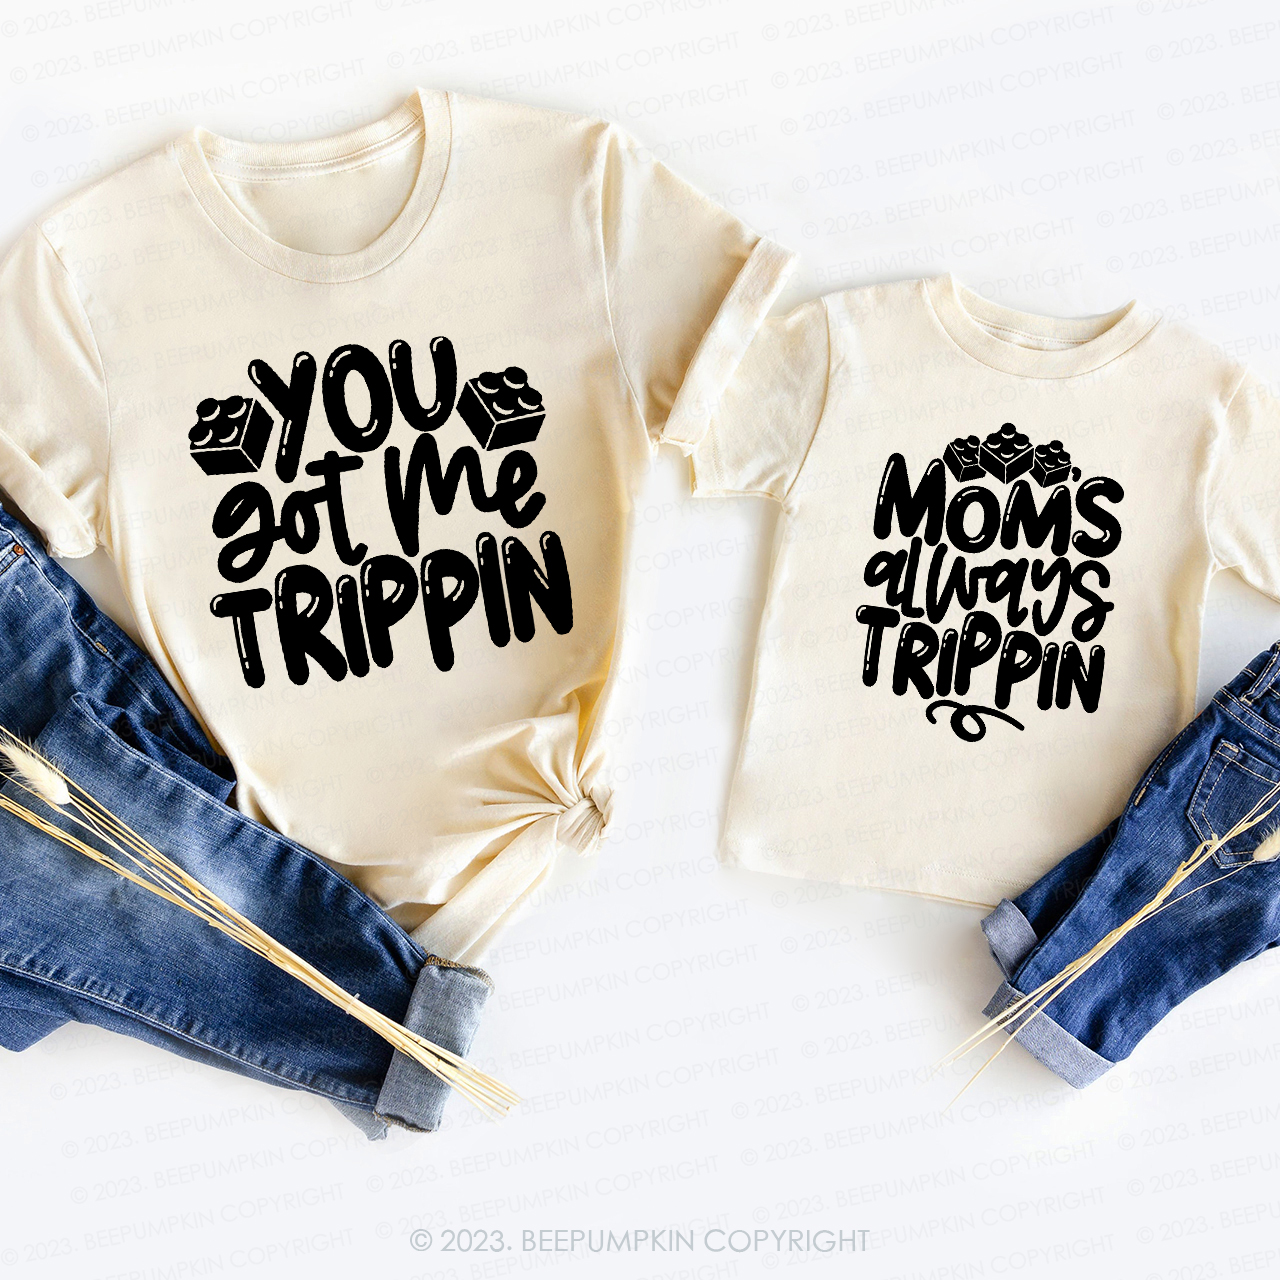 You Got Me Trippin T-Shirts For Mom&Me